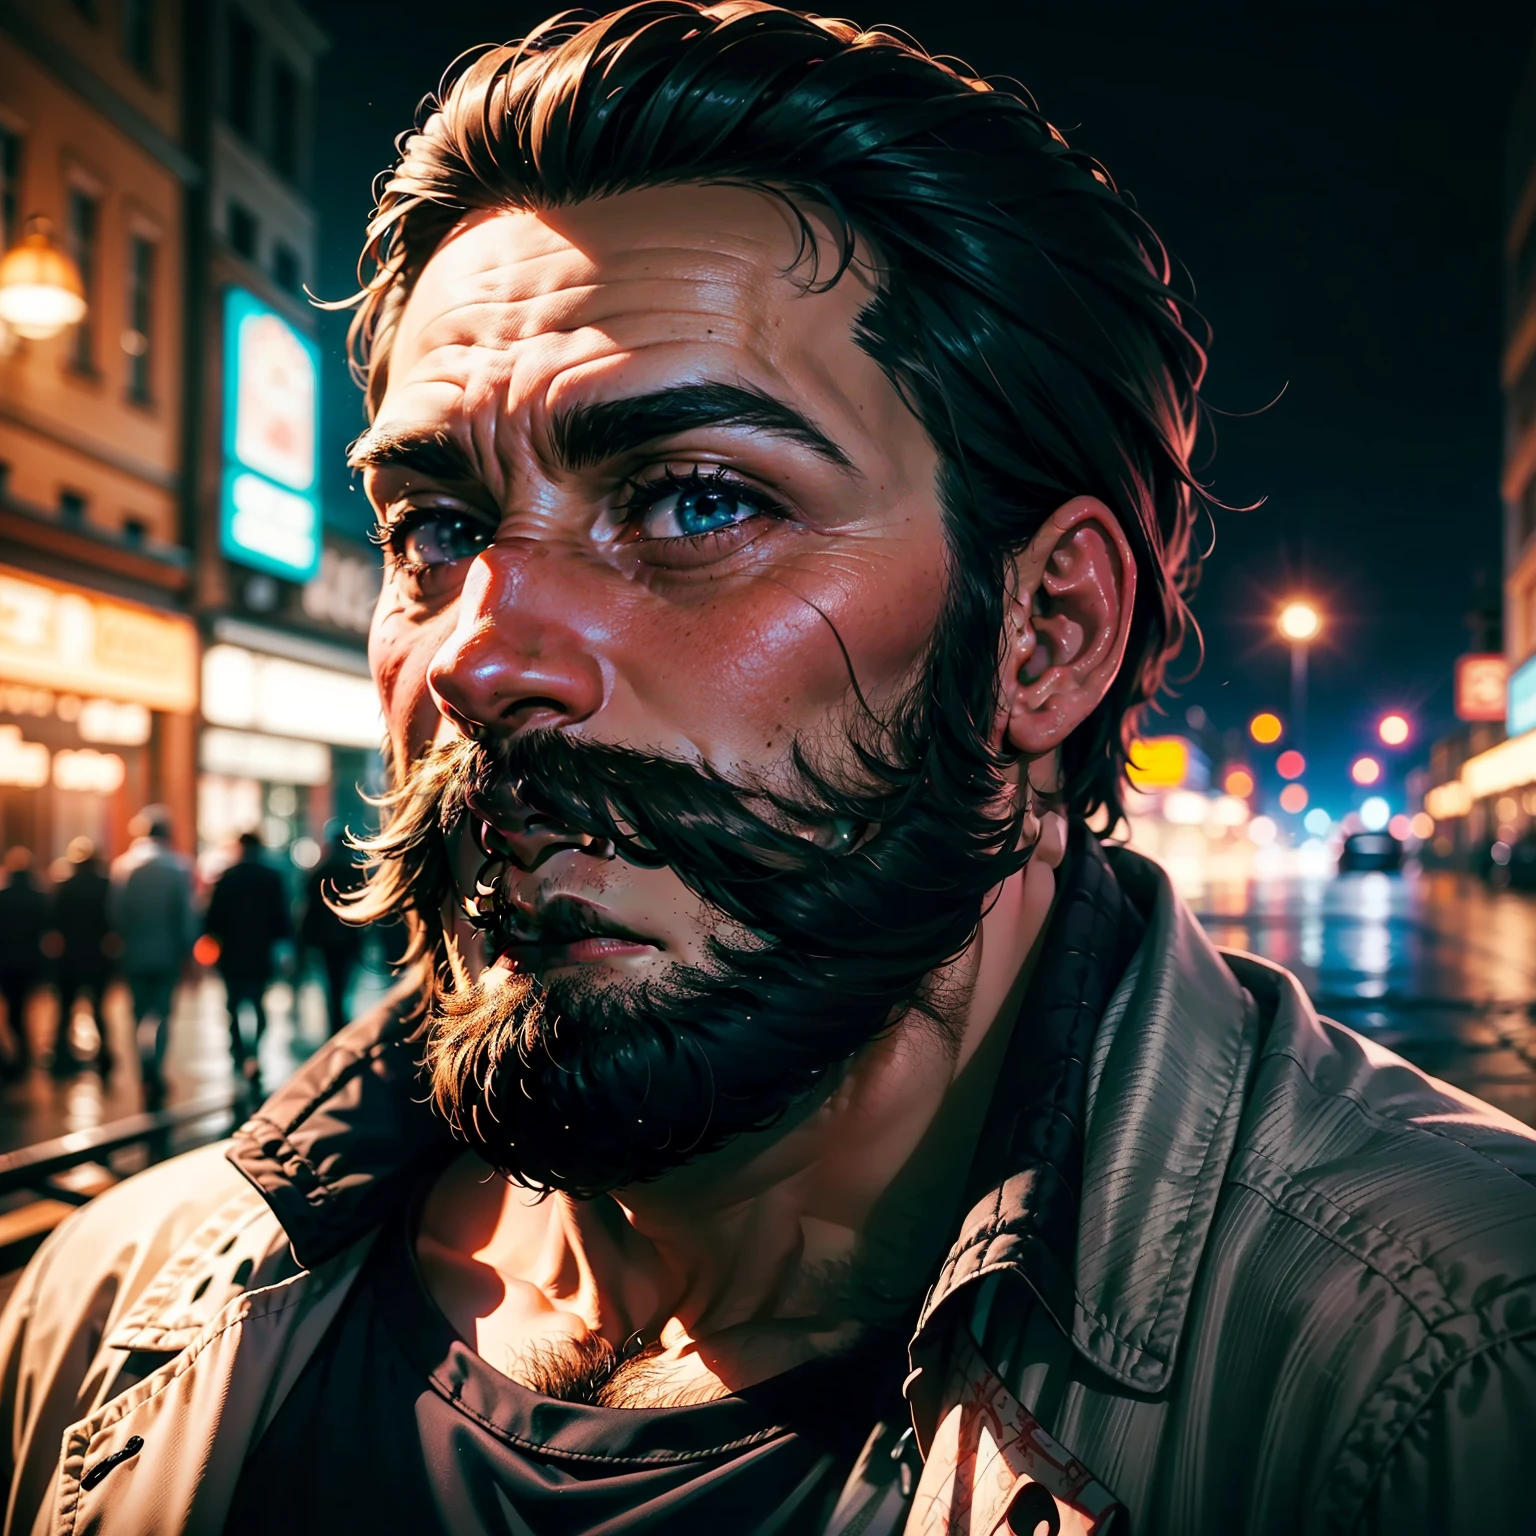 profile picture (just the face), serious, Right eyes, With beard and mustache, Background of a city at night, Bright colors and solid tone, Best 4K quality, detailed.